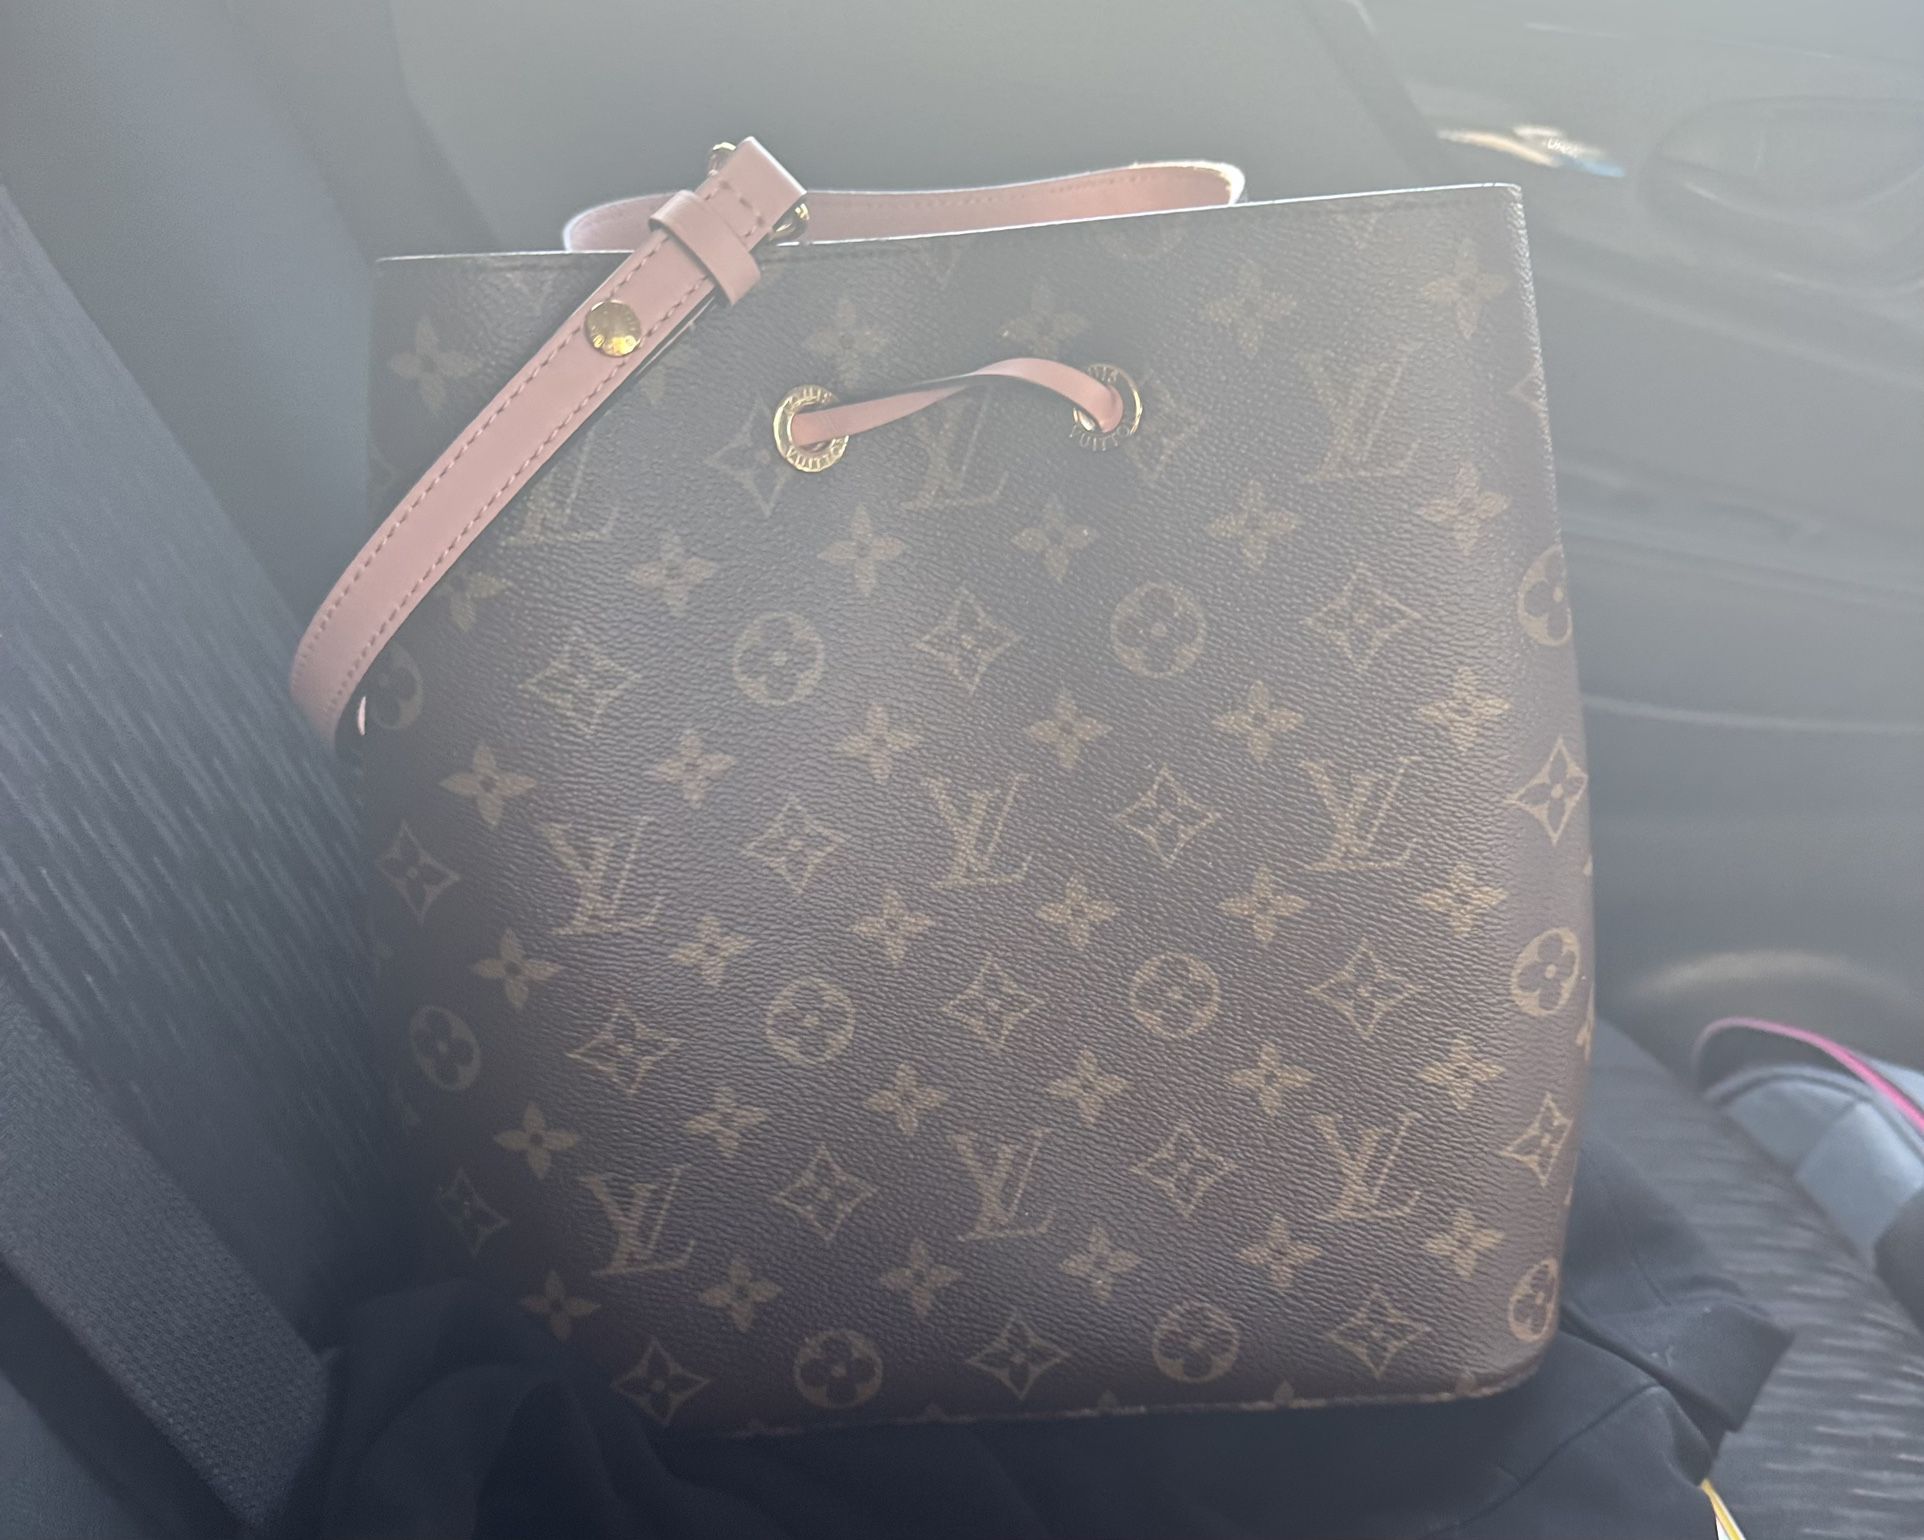 Legit Pink/Brown Louis Vuitton Bag For Sale for Sale in Brooklyn